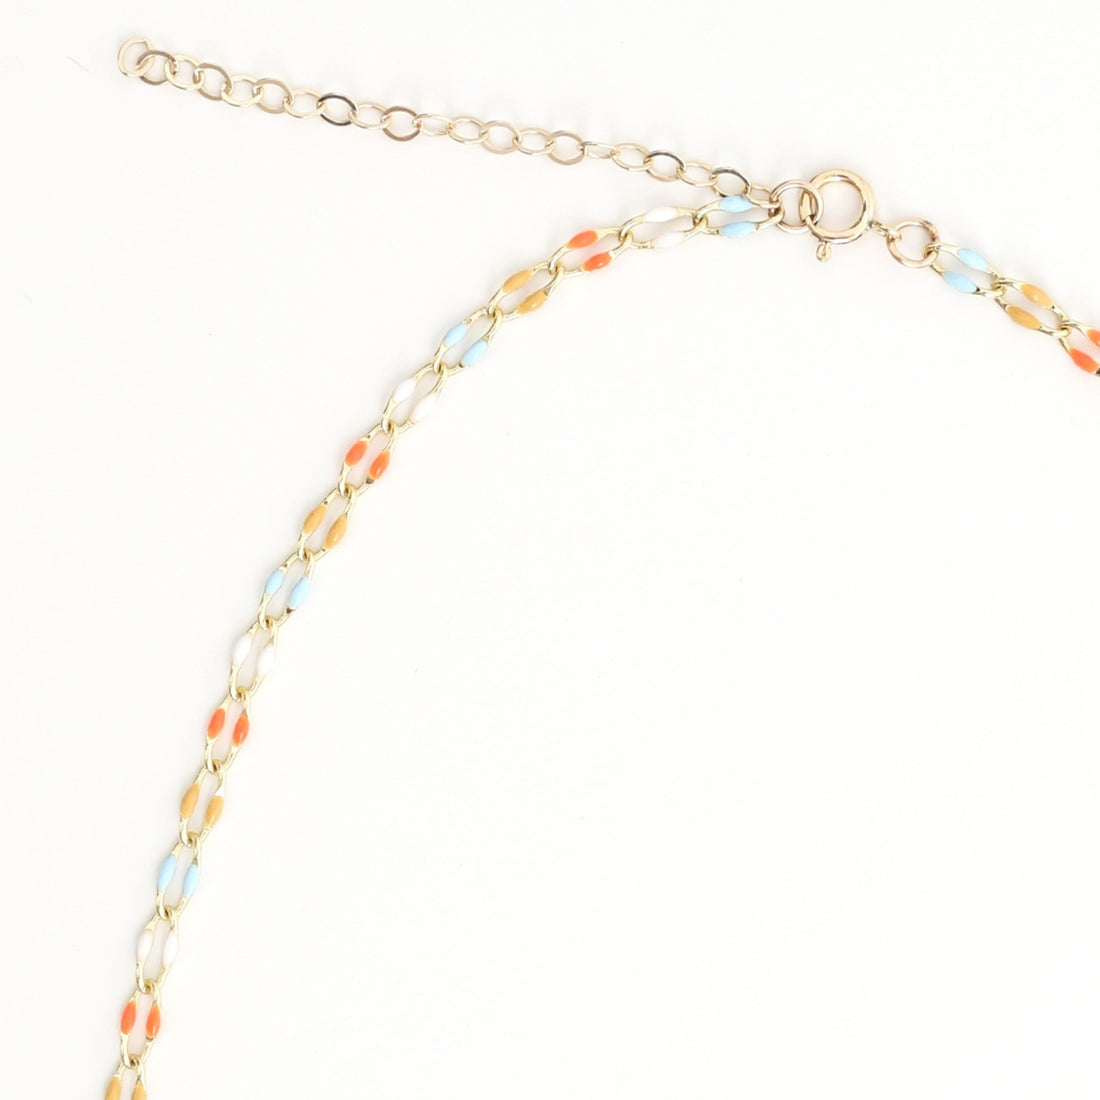 "The Topanga" Gold and Enamel Chain Necklace